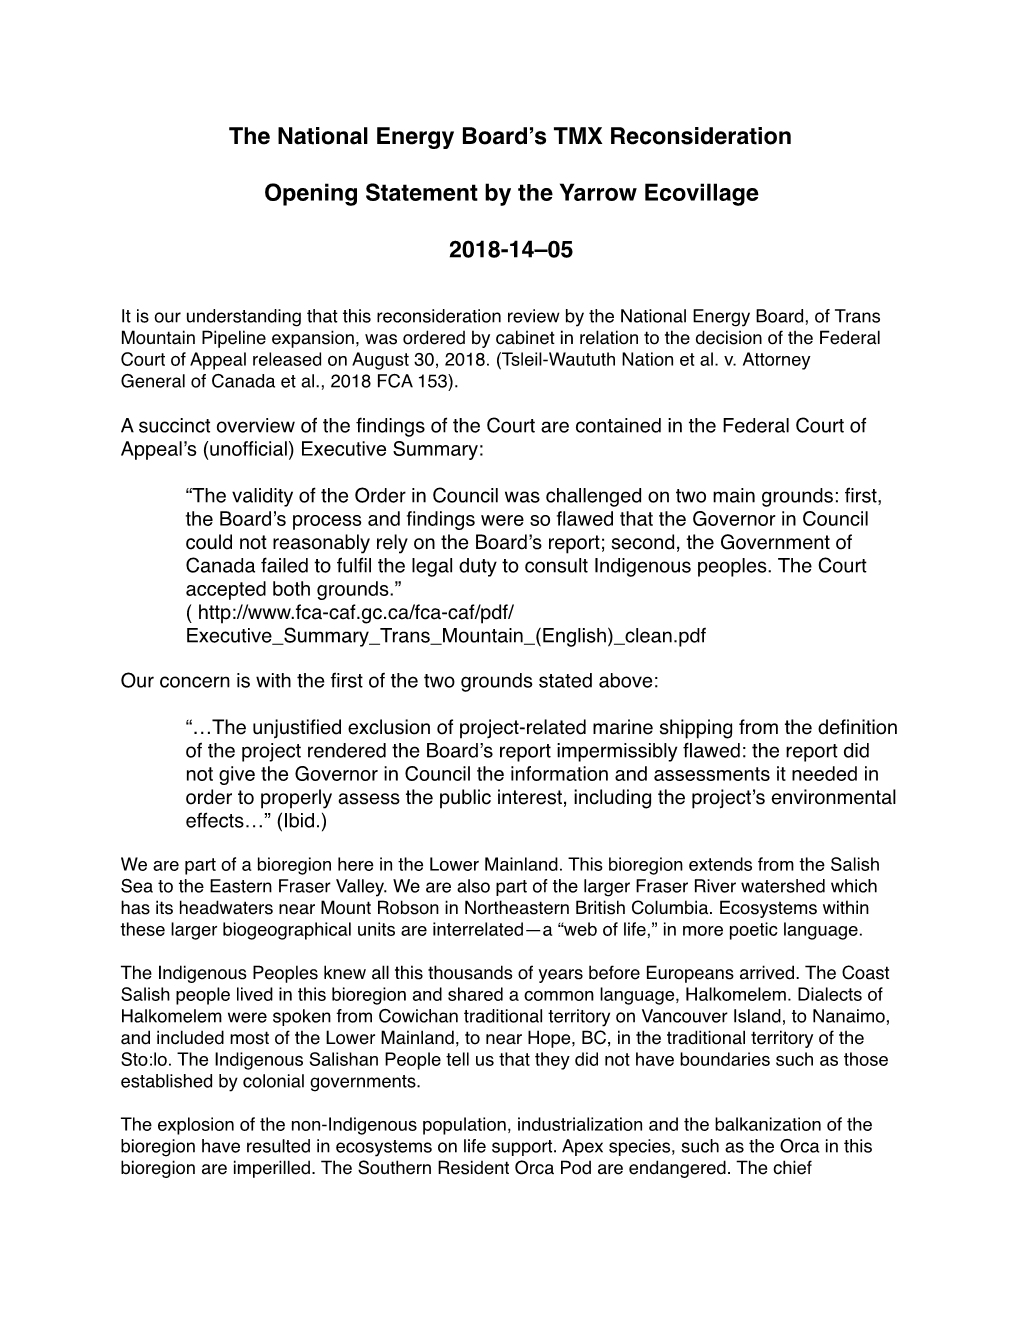 Yarrow Ecovillage Opening Statement NEB Re-Review Of